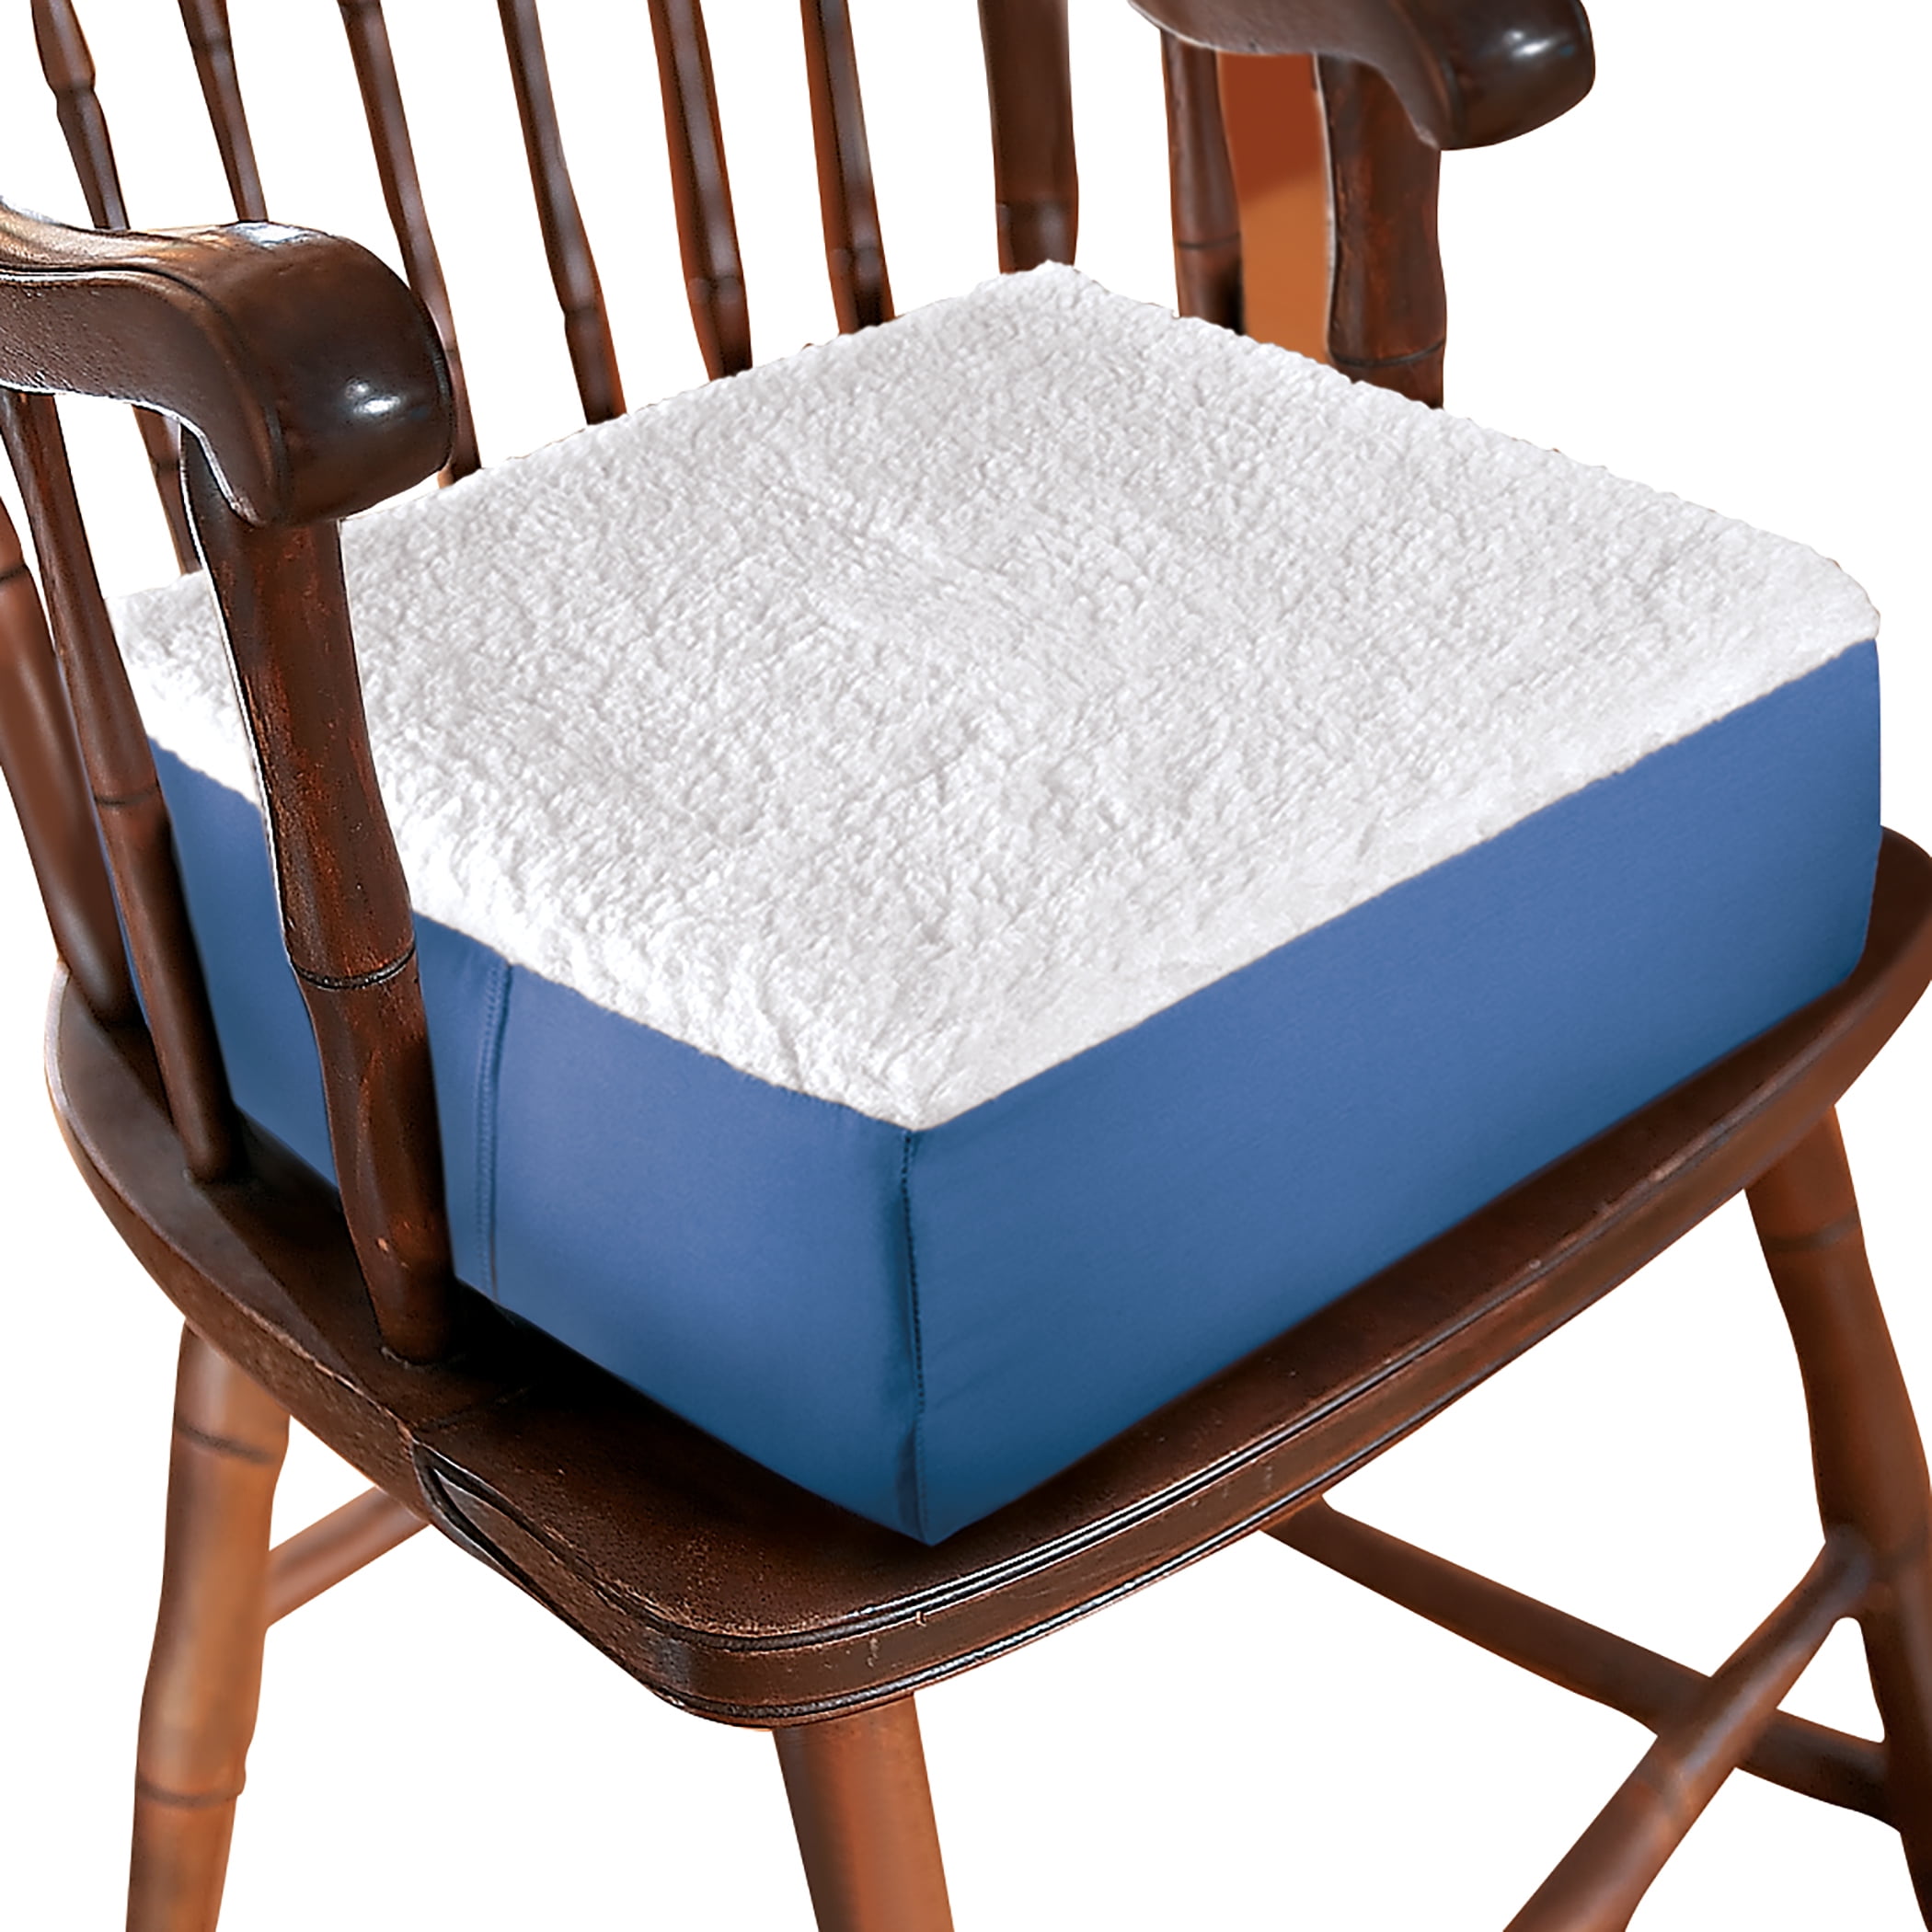 Comfort Finds Rise with Ease Seat Cushion - Thick Firm Chair